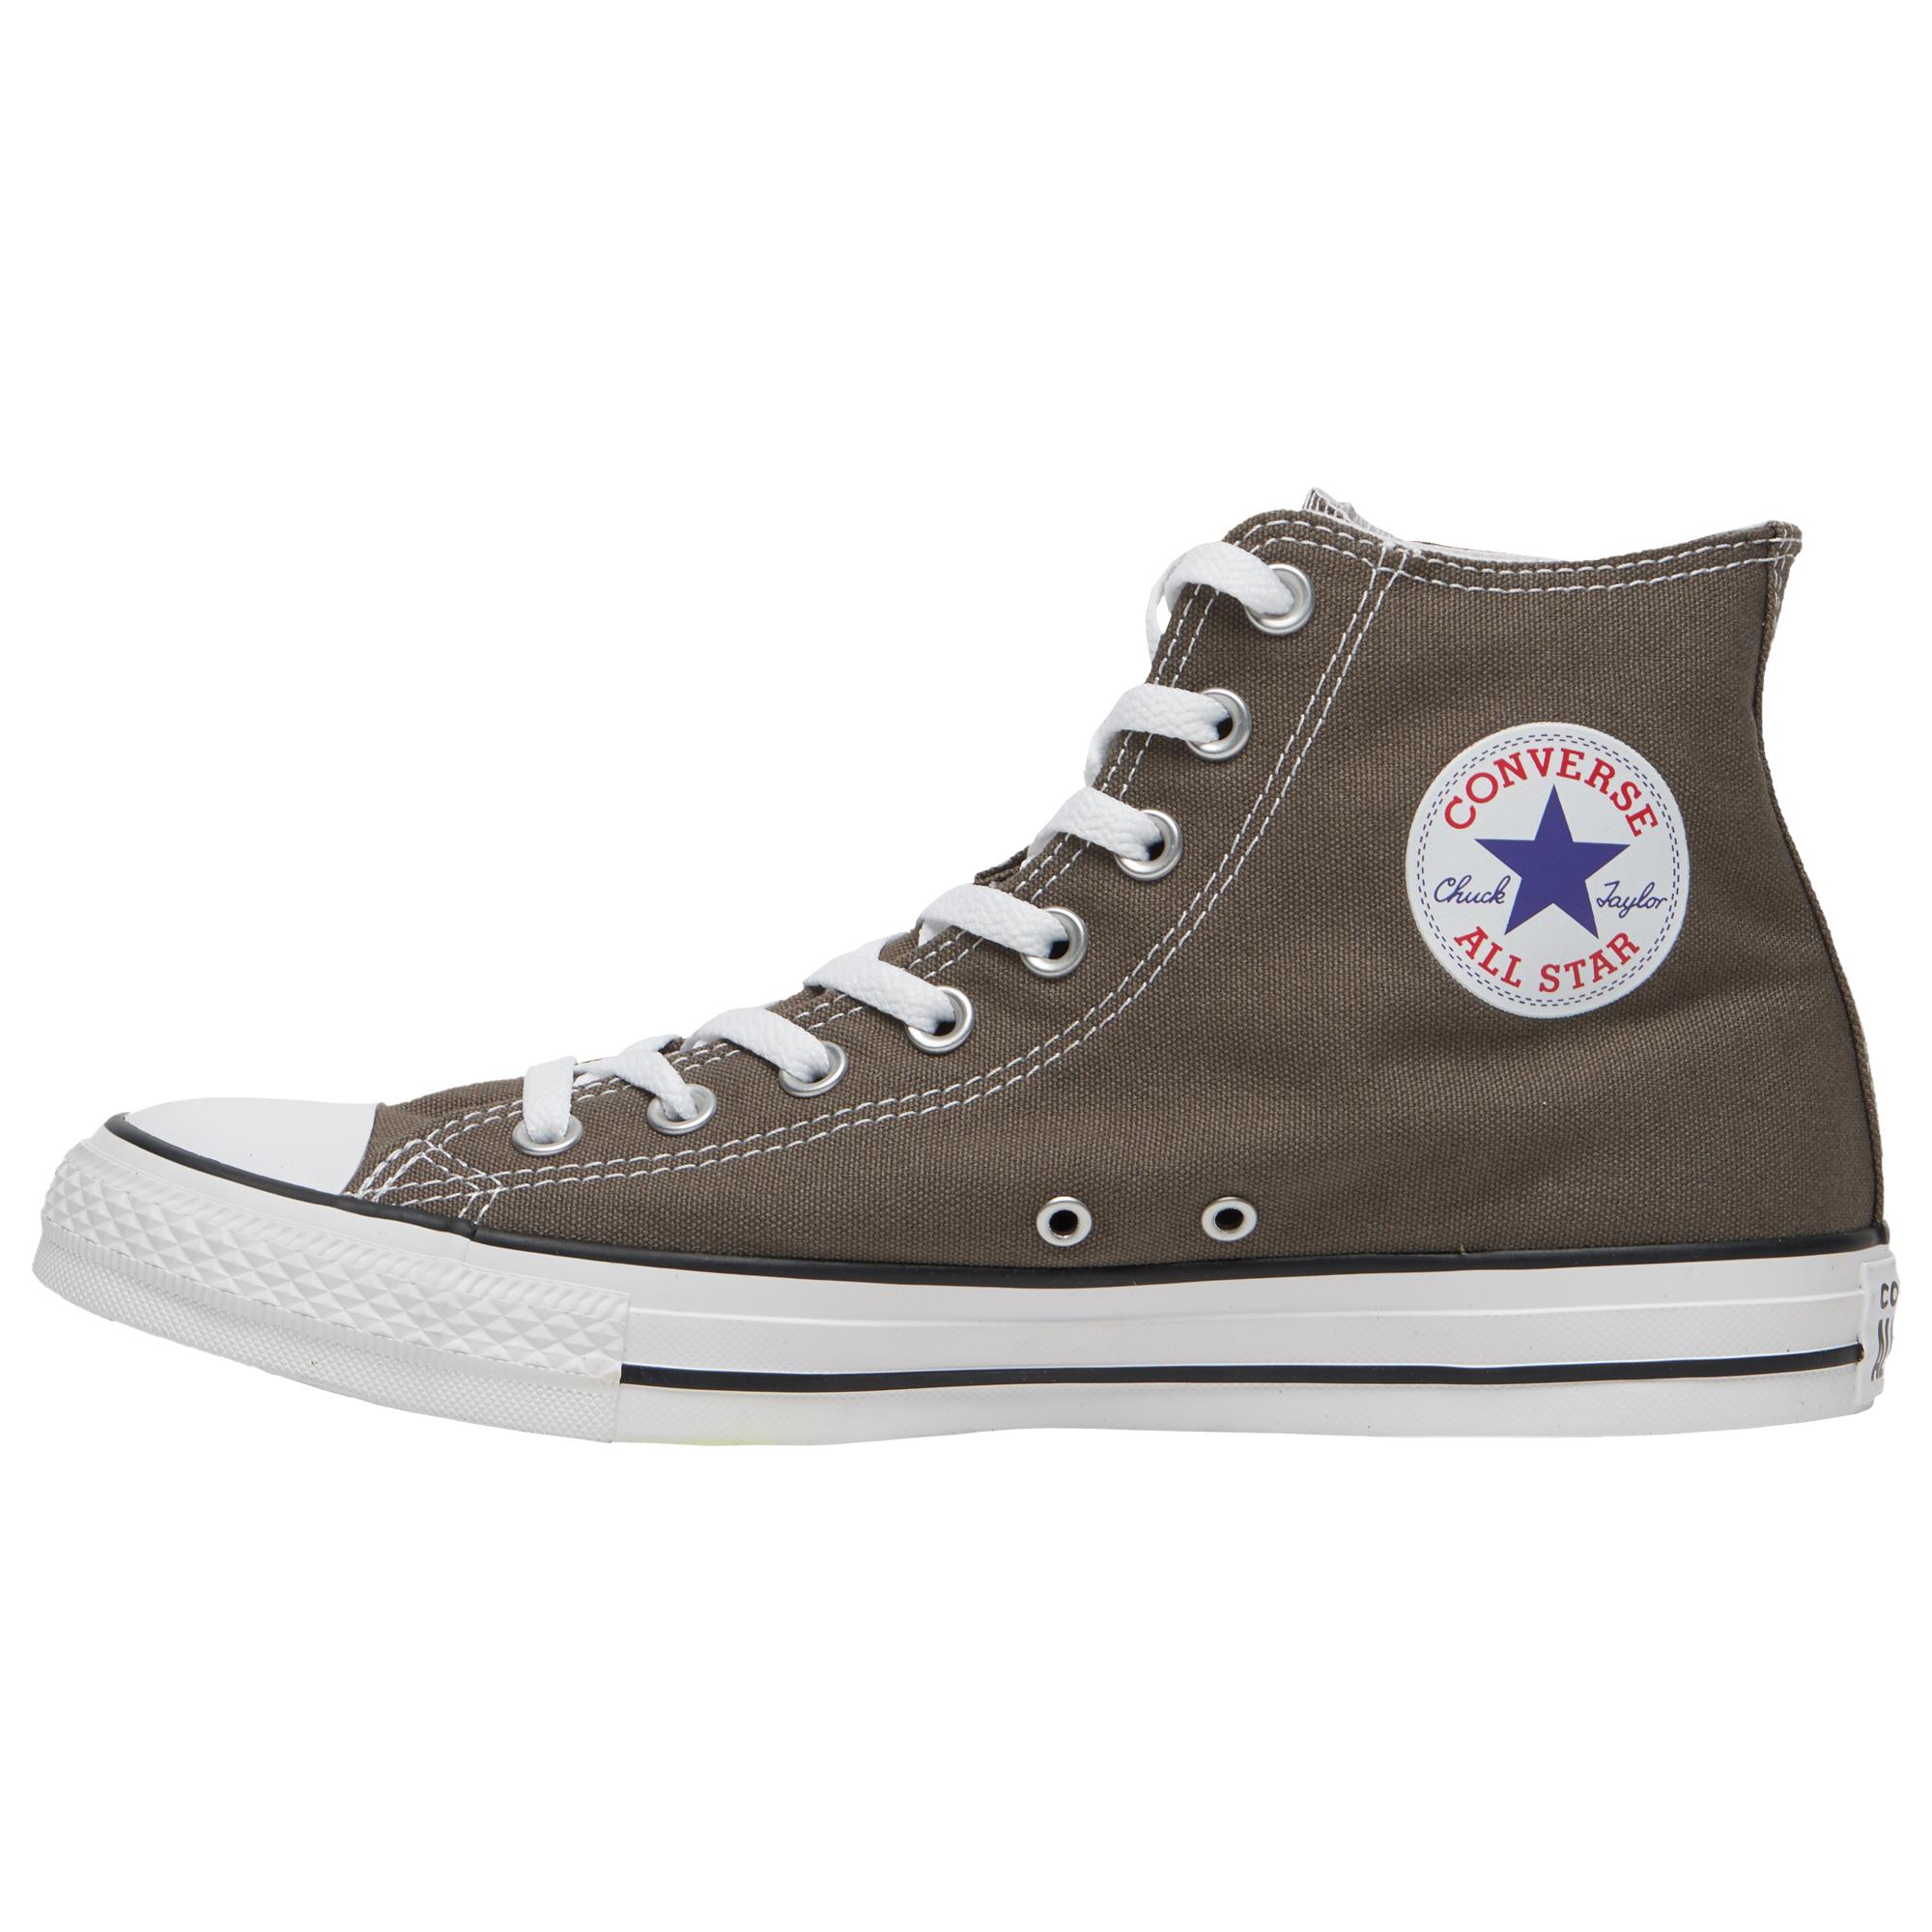 Converse All Star Hi Basketball Shoes in Gray for Men - Lyst